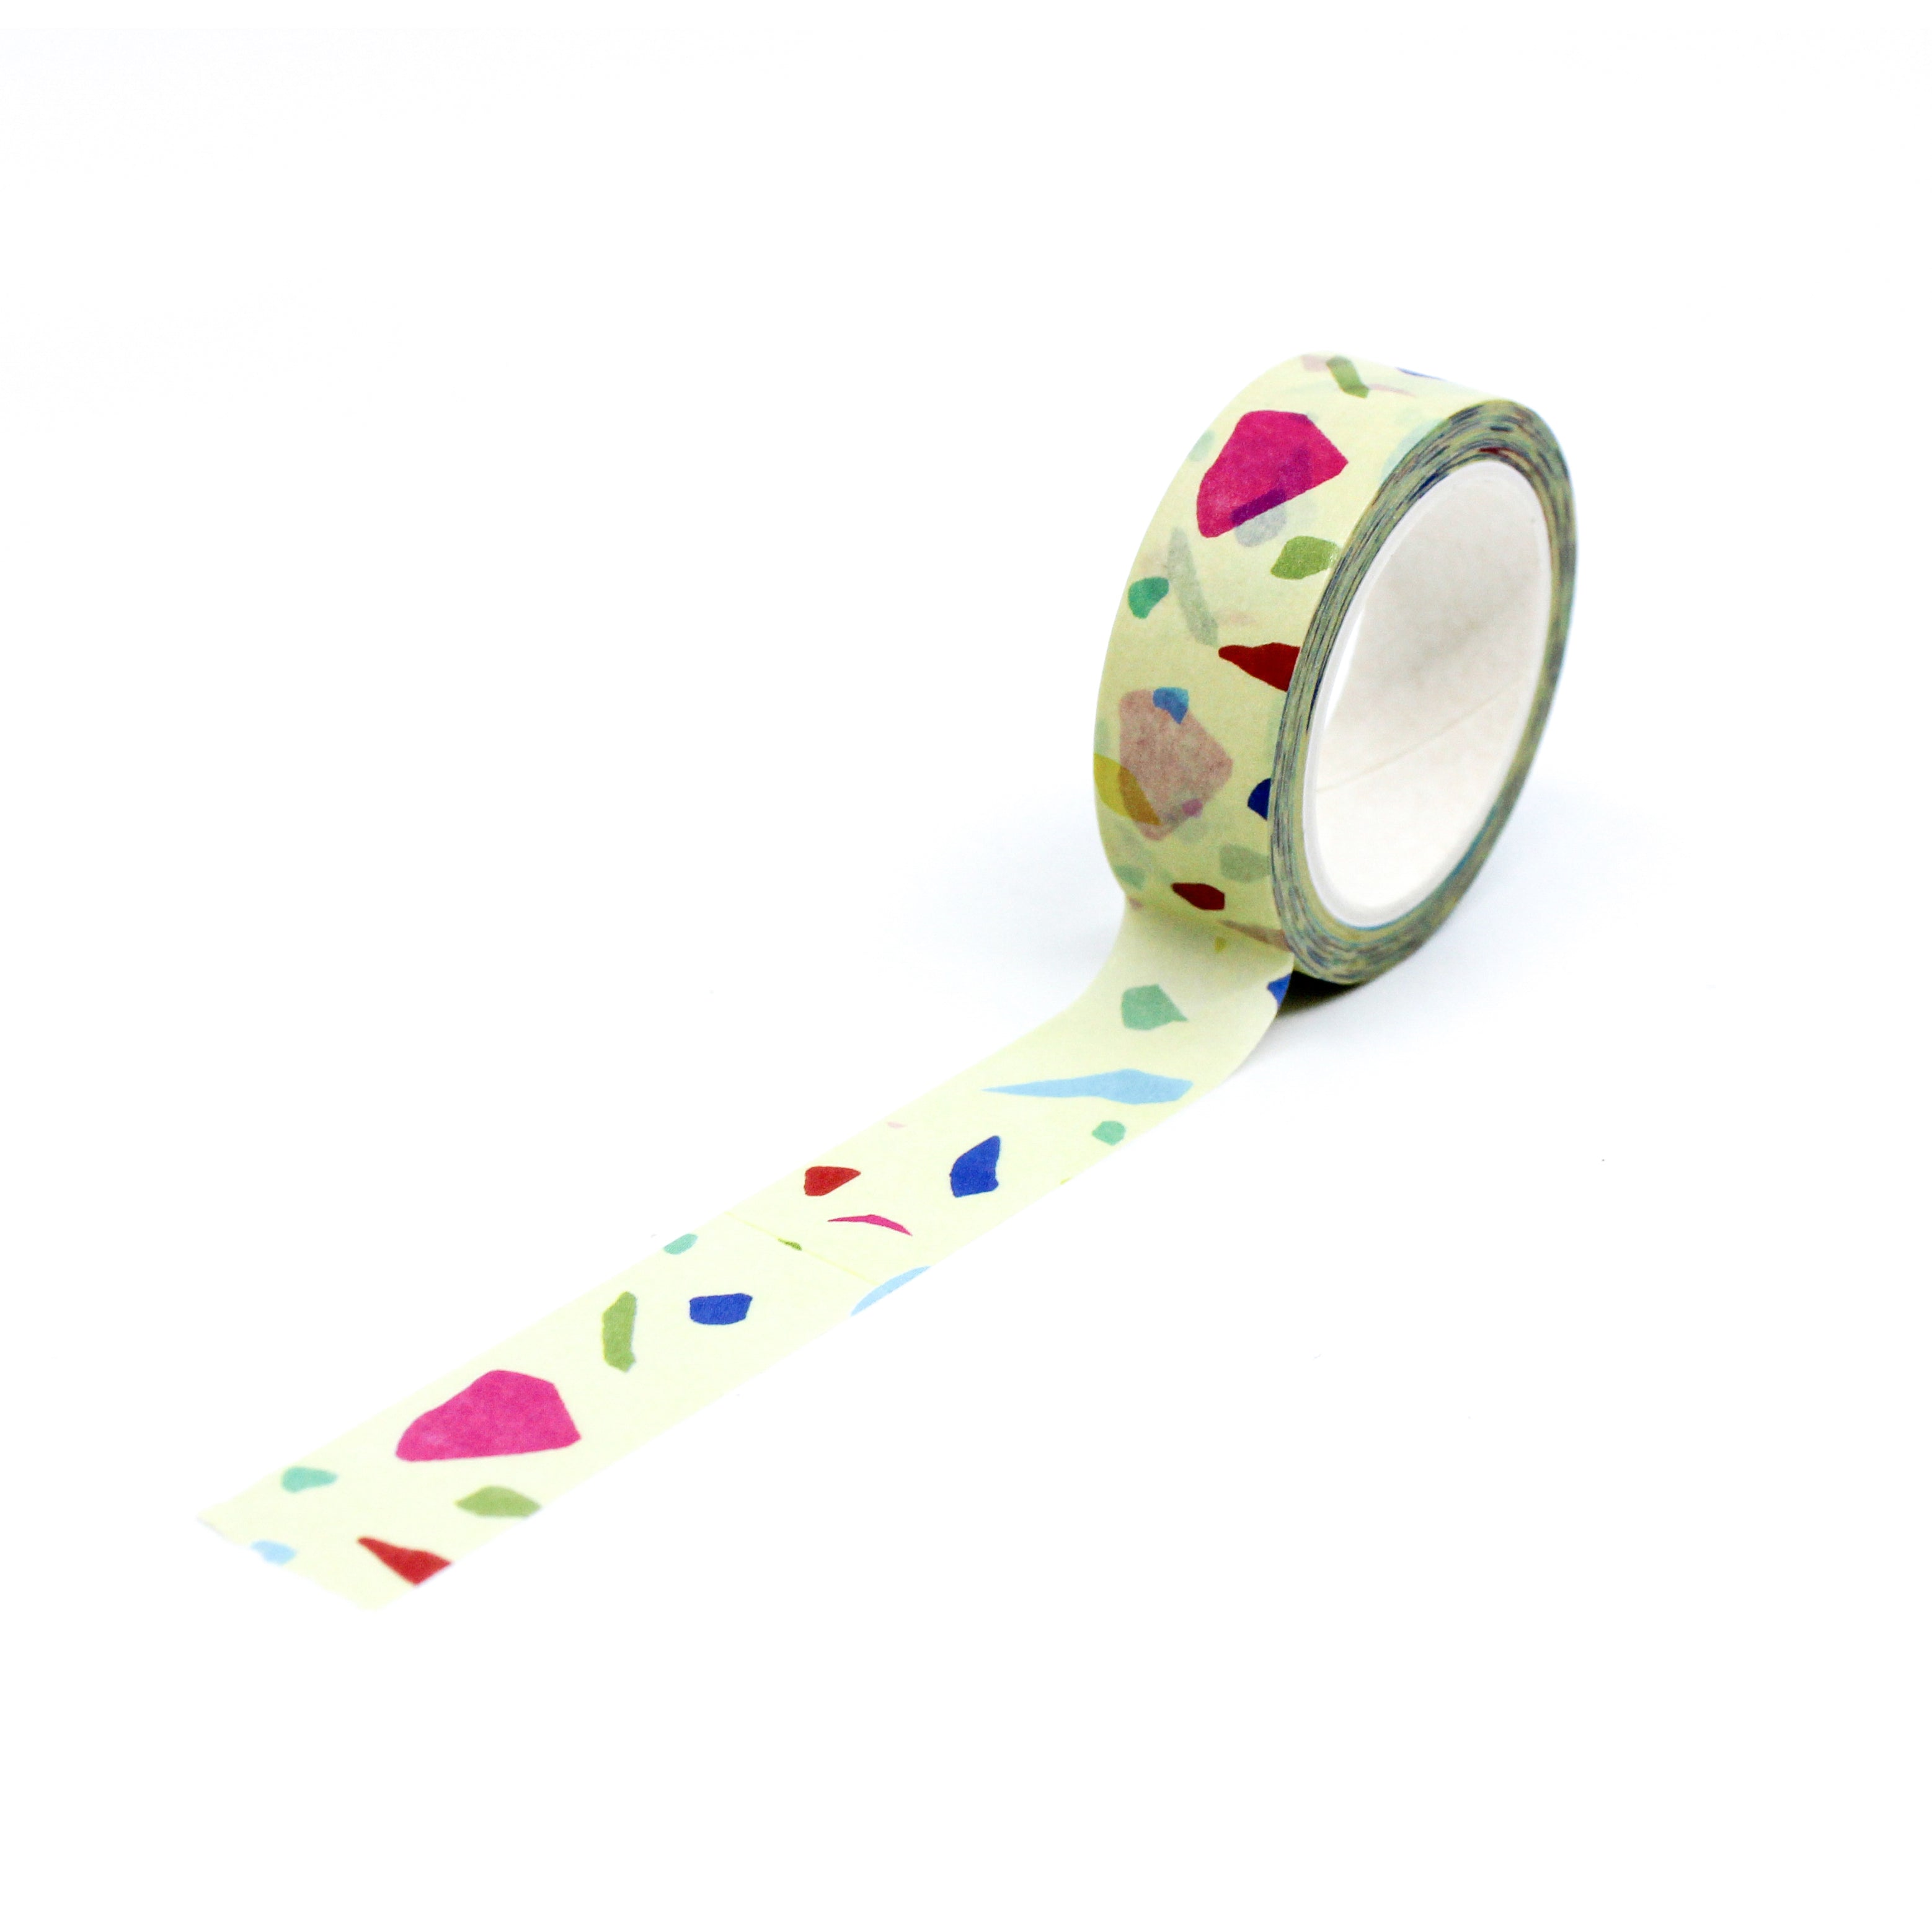 This is a full pattern repeat view of yellow terrazzo washi tape from BBB Supplies Craft Shop